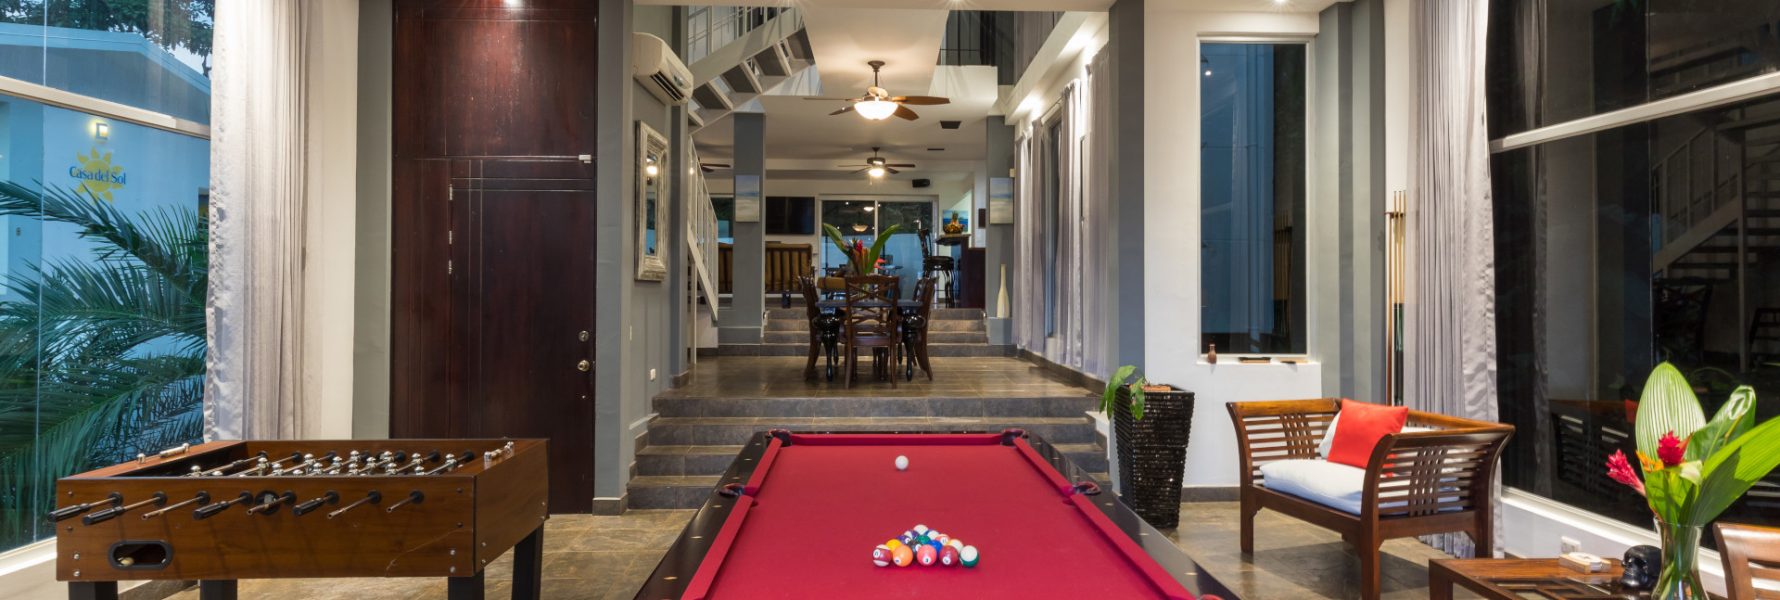 The game room features comfy seating, a pool table, foosball table, and breathtaking views.